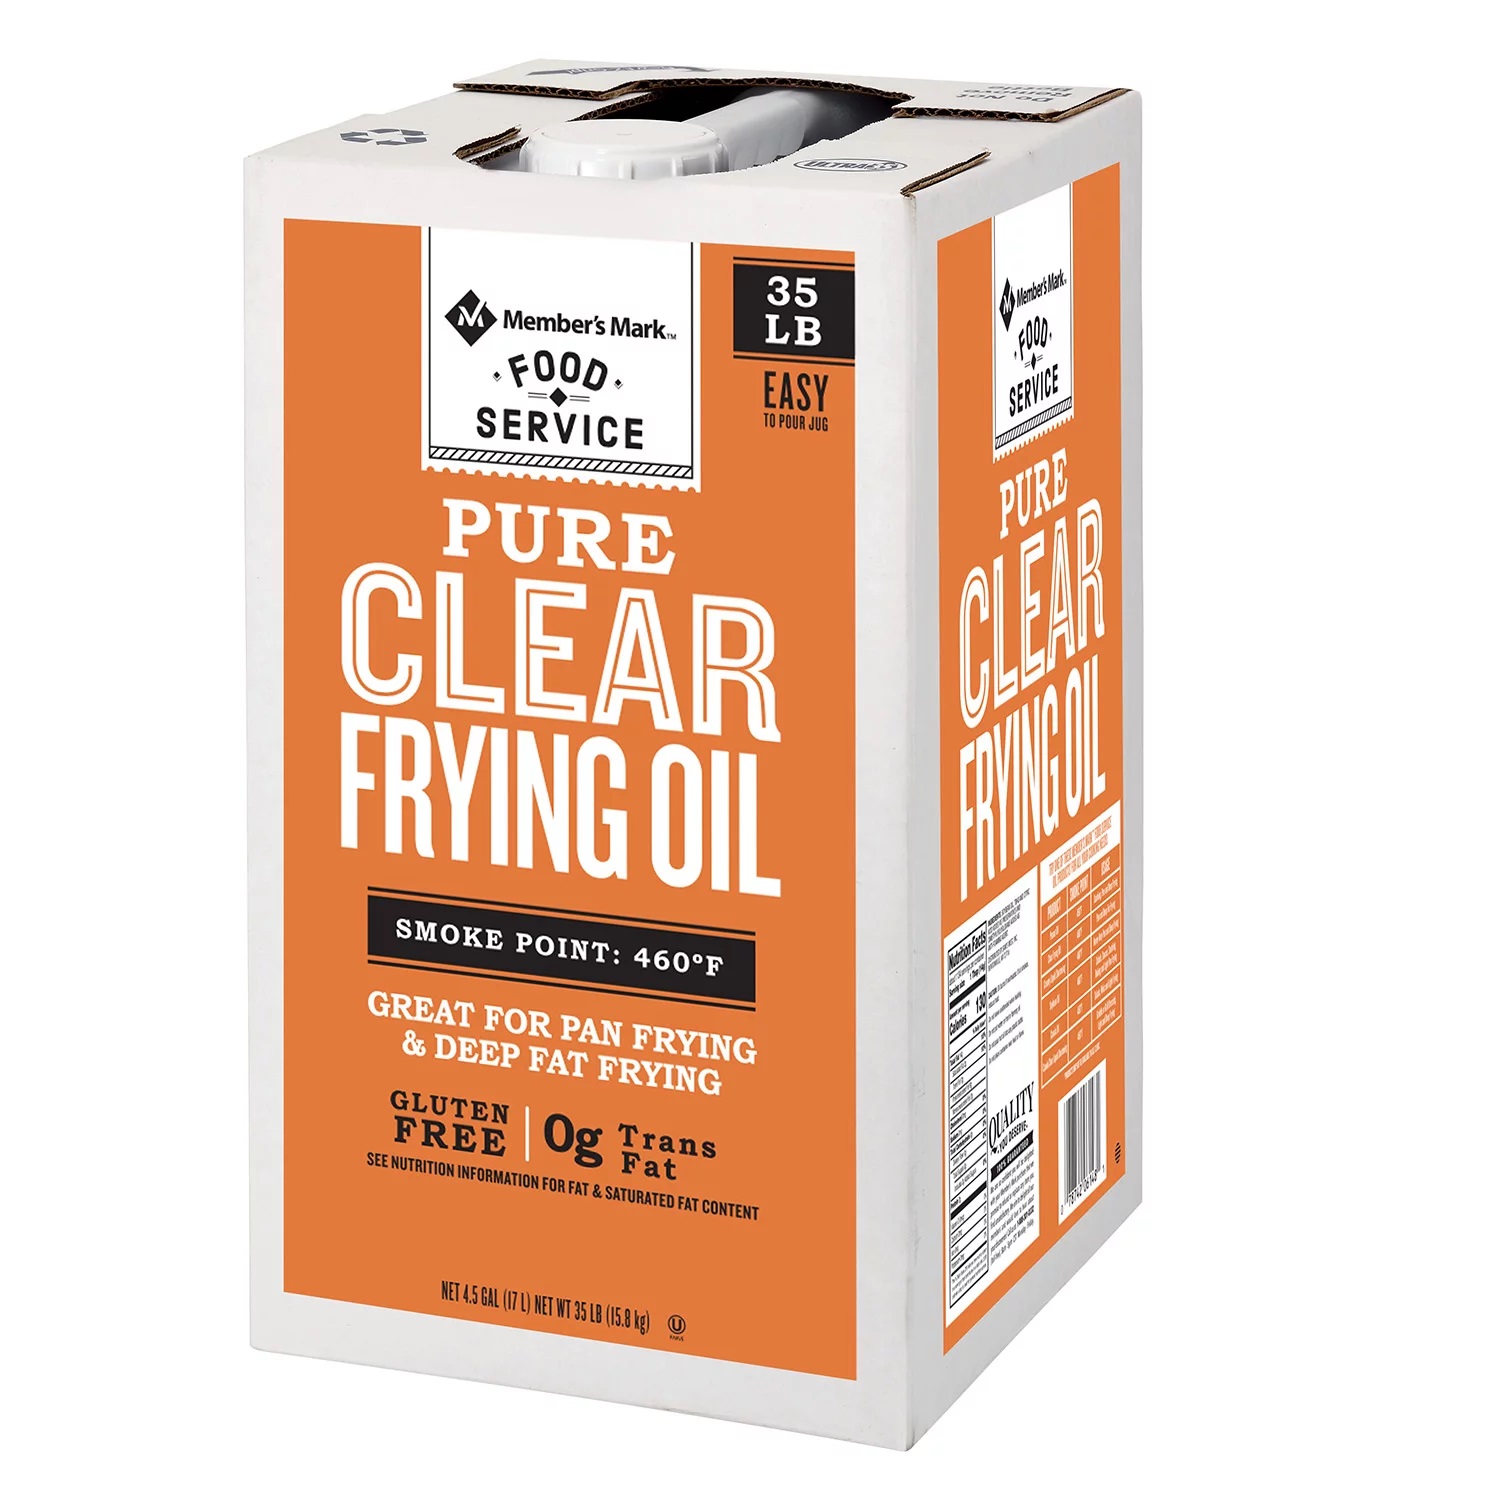 Member's Mark 100% Pure Clear Frying Oil (35 Pounds)